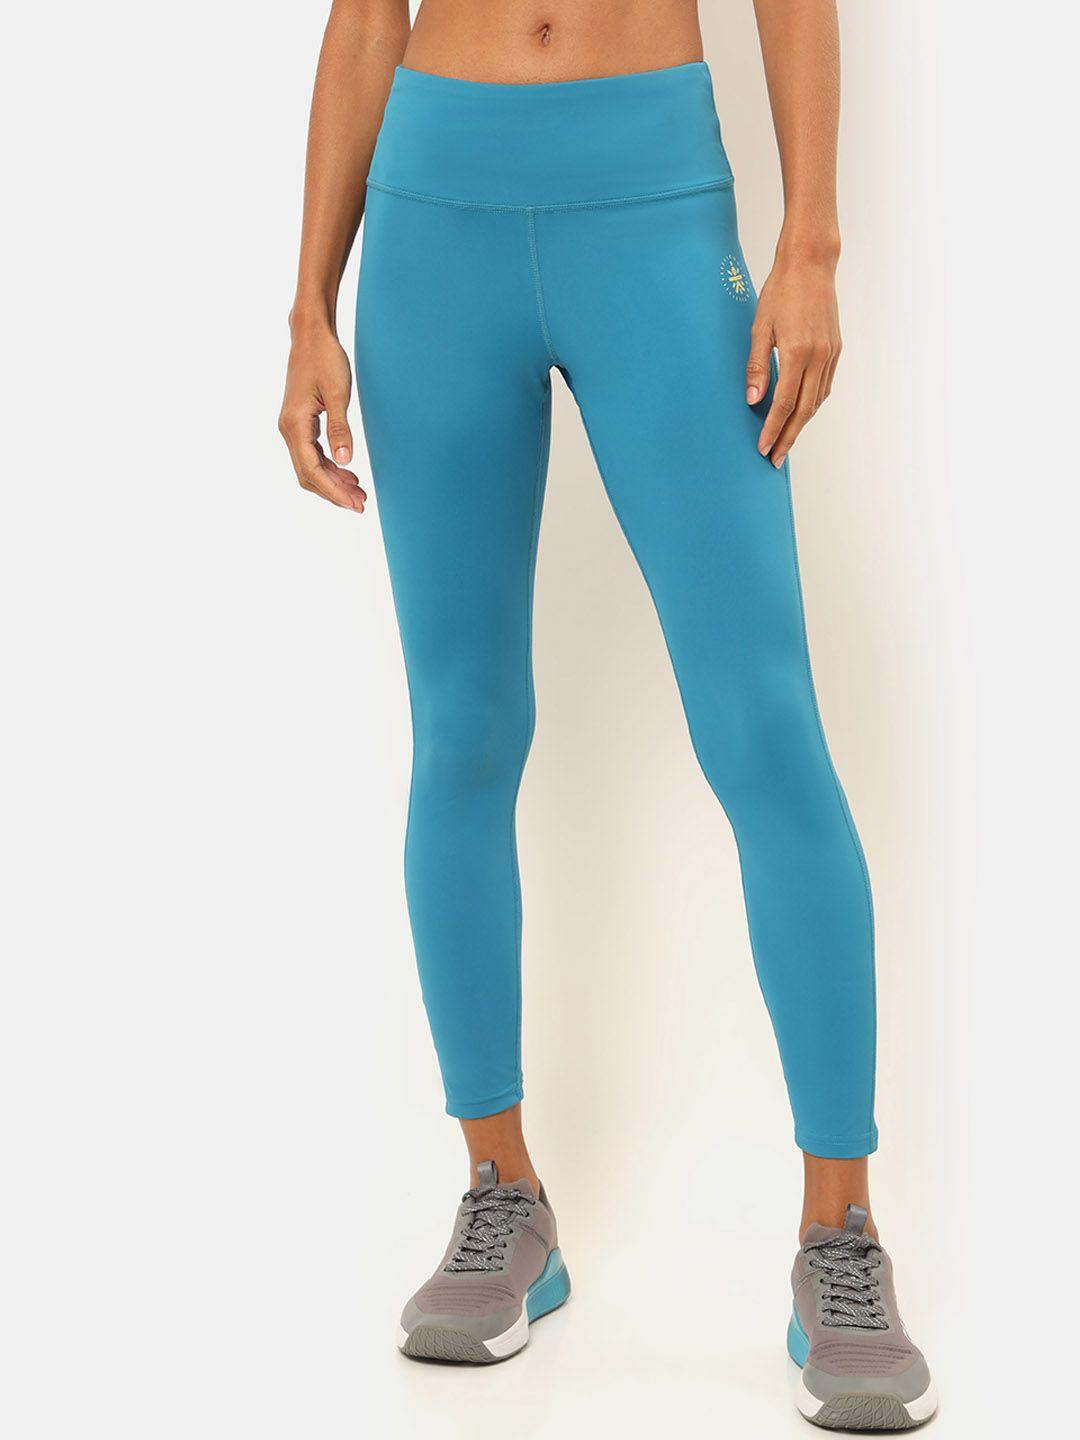 cultsportone women teal blue solid tights